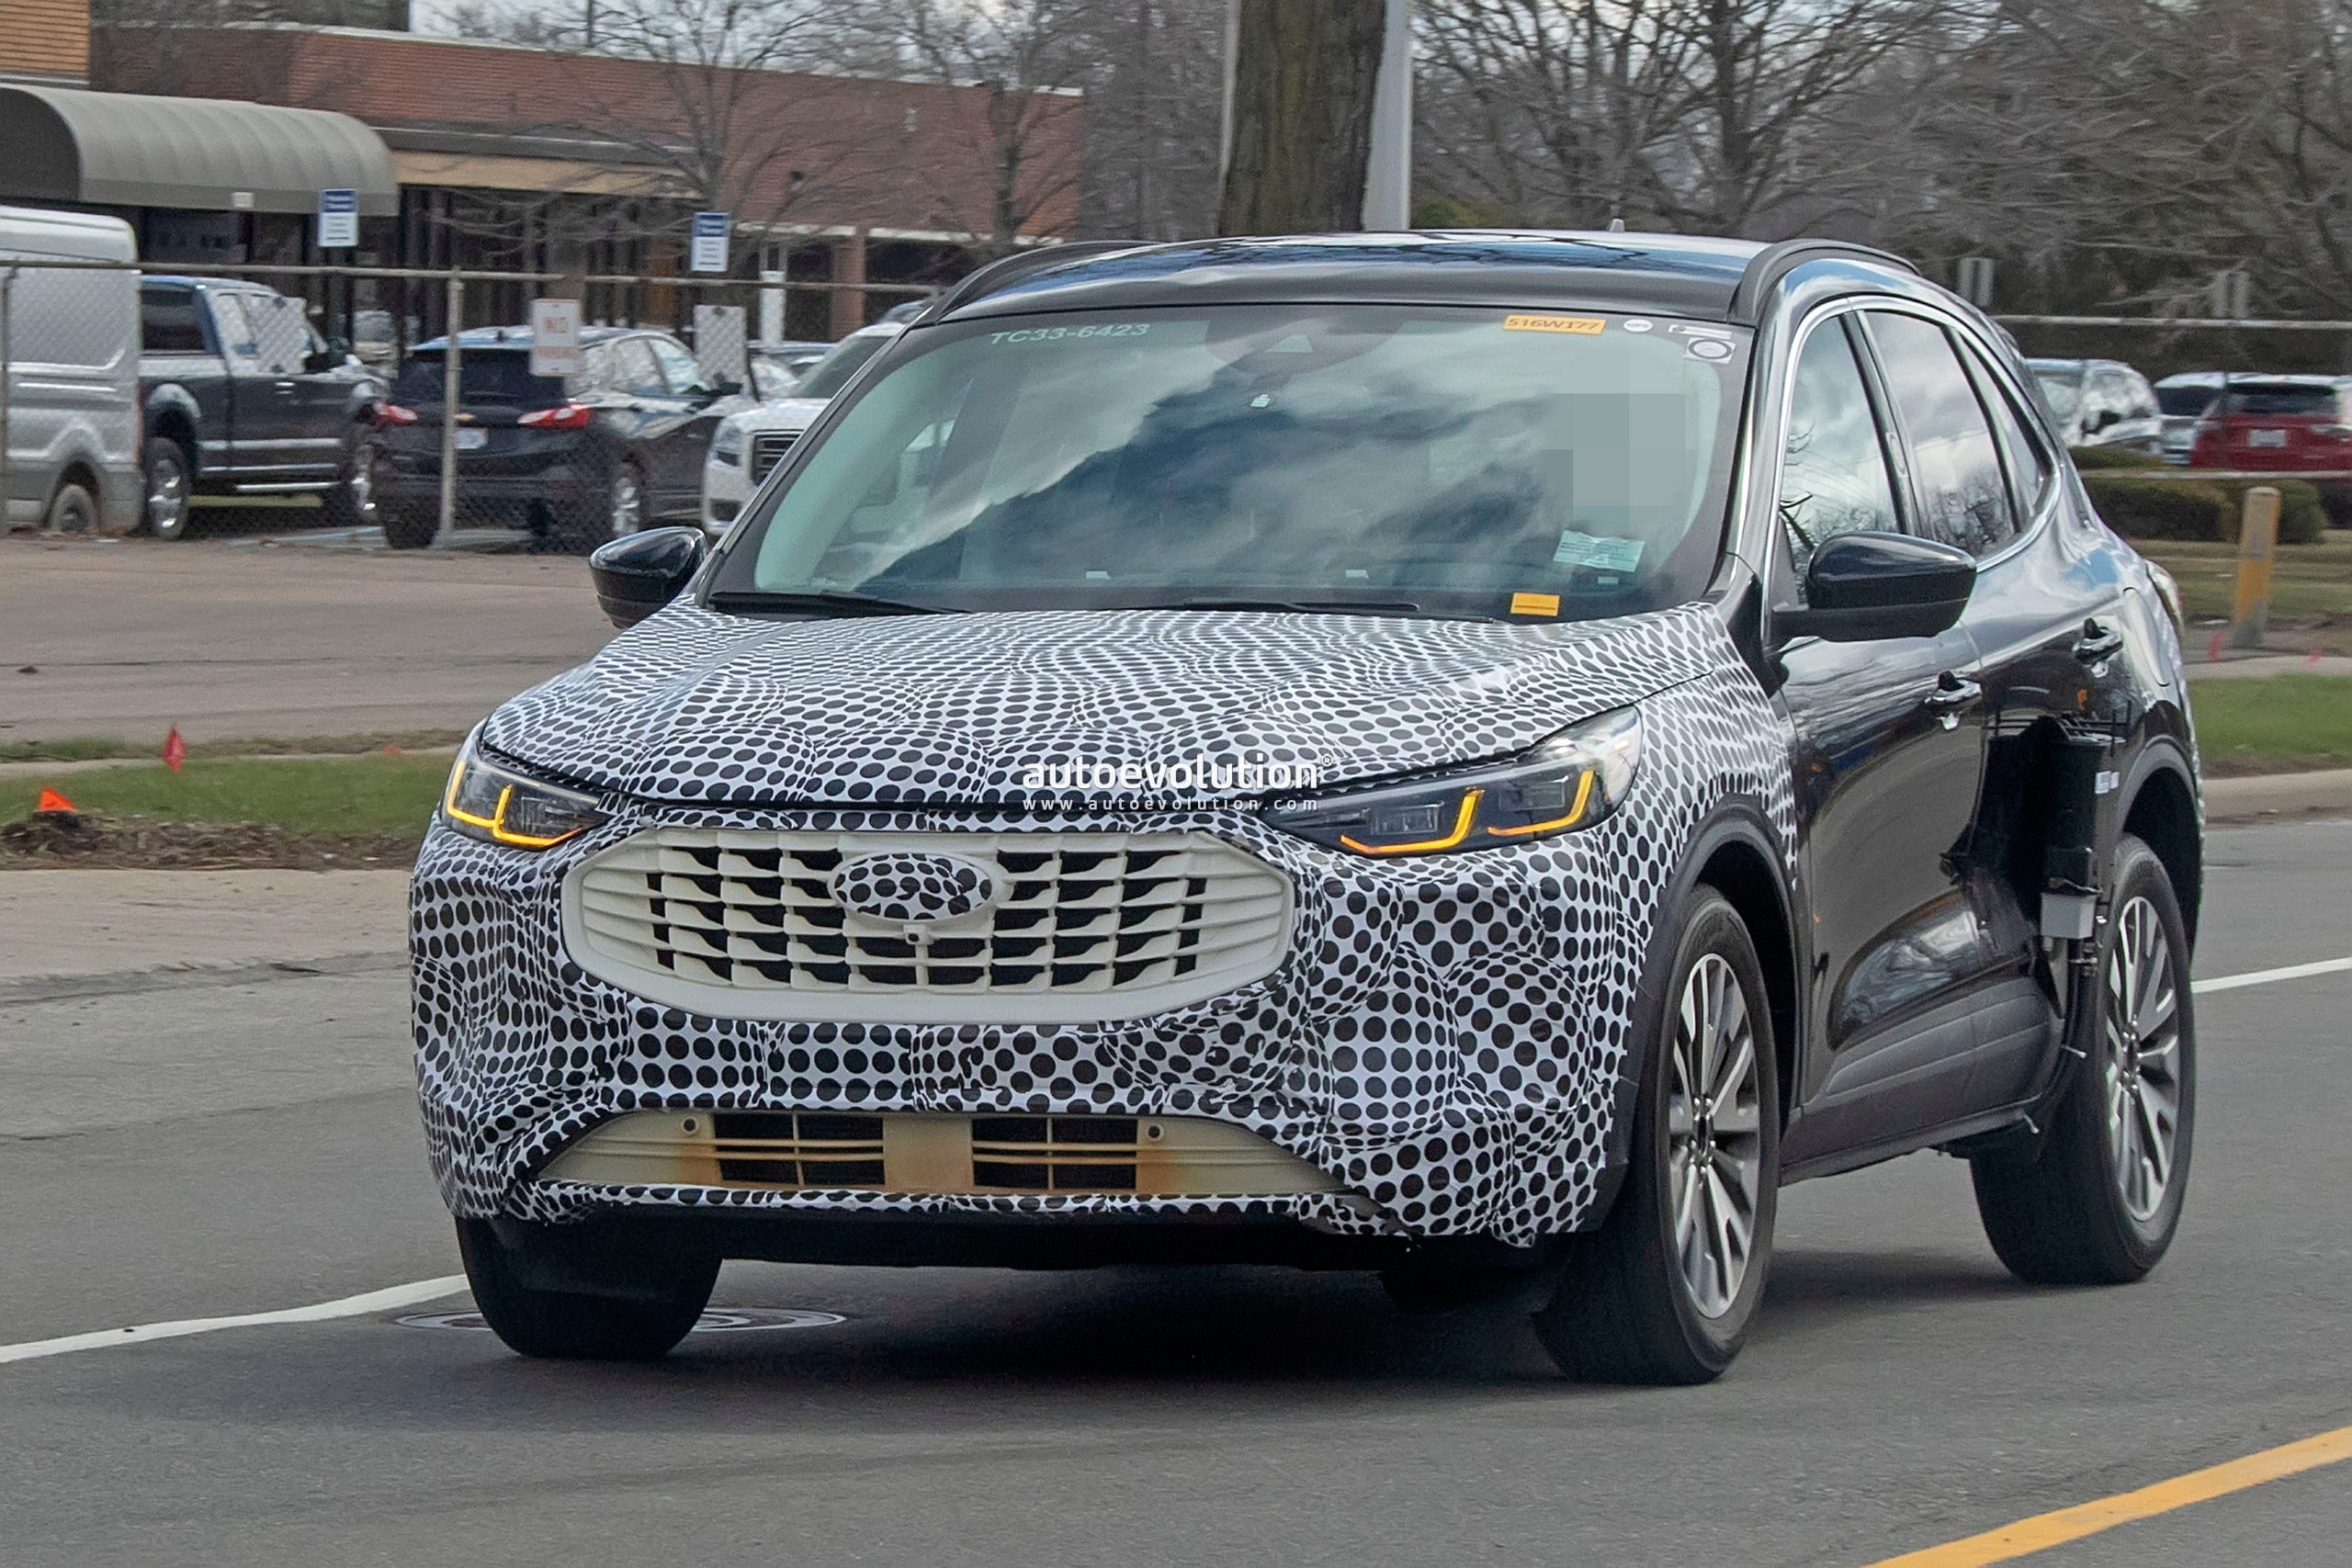 2023 Ford Kuga/Escape Spied With Skimpy Grille Camouflage, New DRL